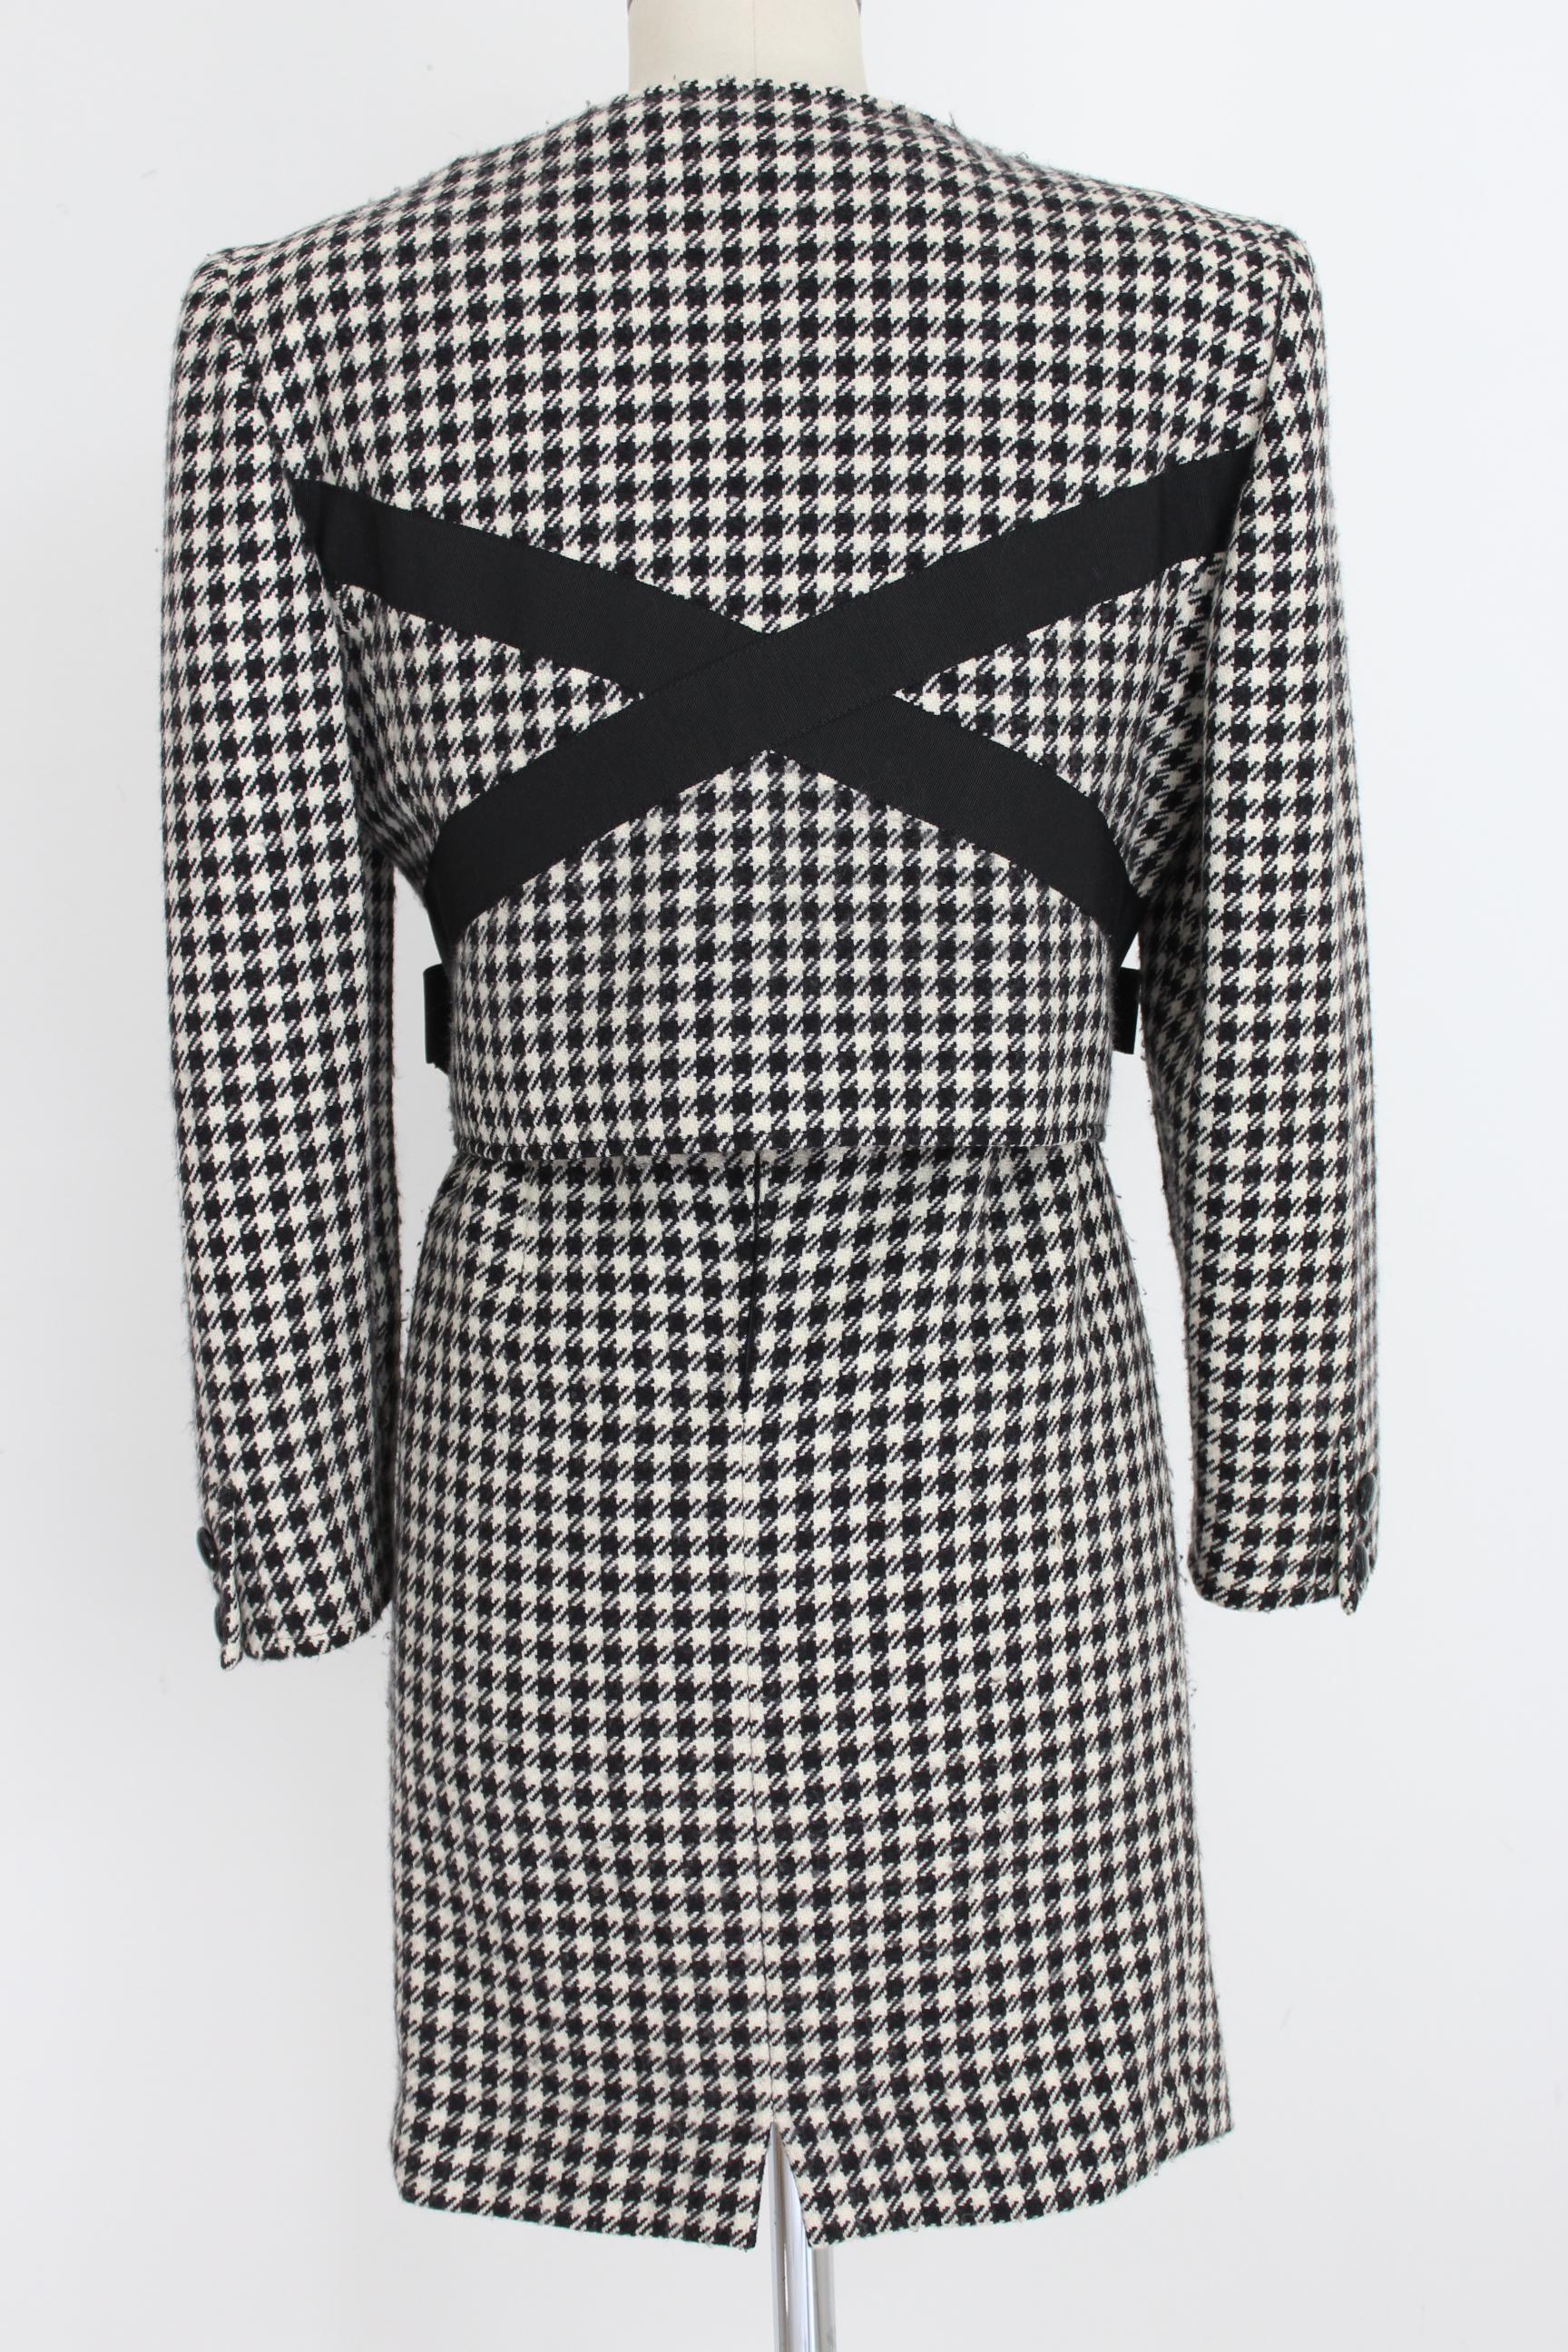 Valentino Boutique 80s vintage women's skirt suit. Houndstooth patterned suit, black and white color. Short jacket at the waist with zip closure, bows on the sides. Straight pencil skirt. 100% wool. Made in Italy. Excellent vintage